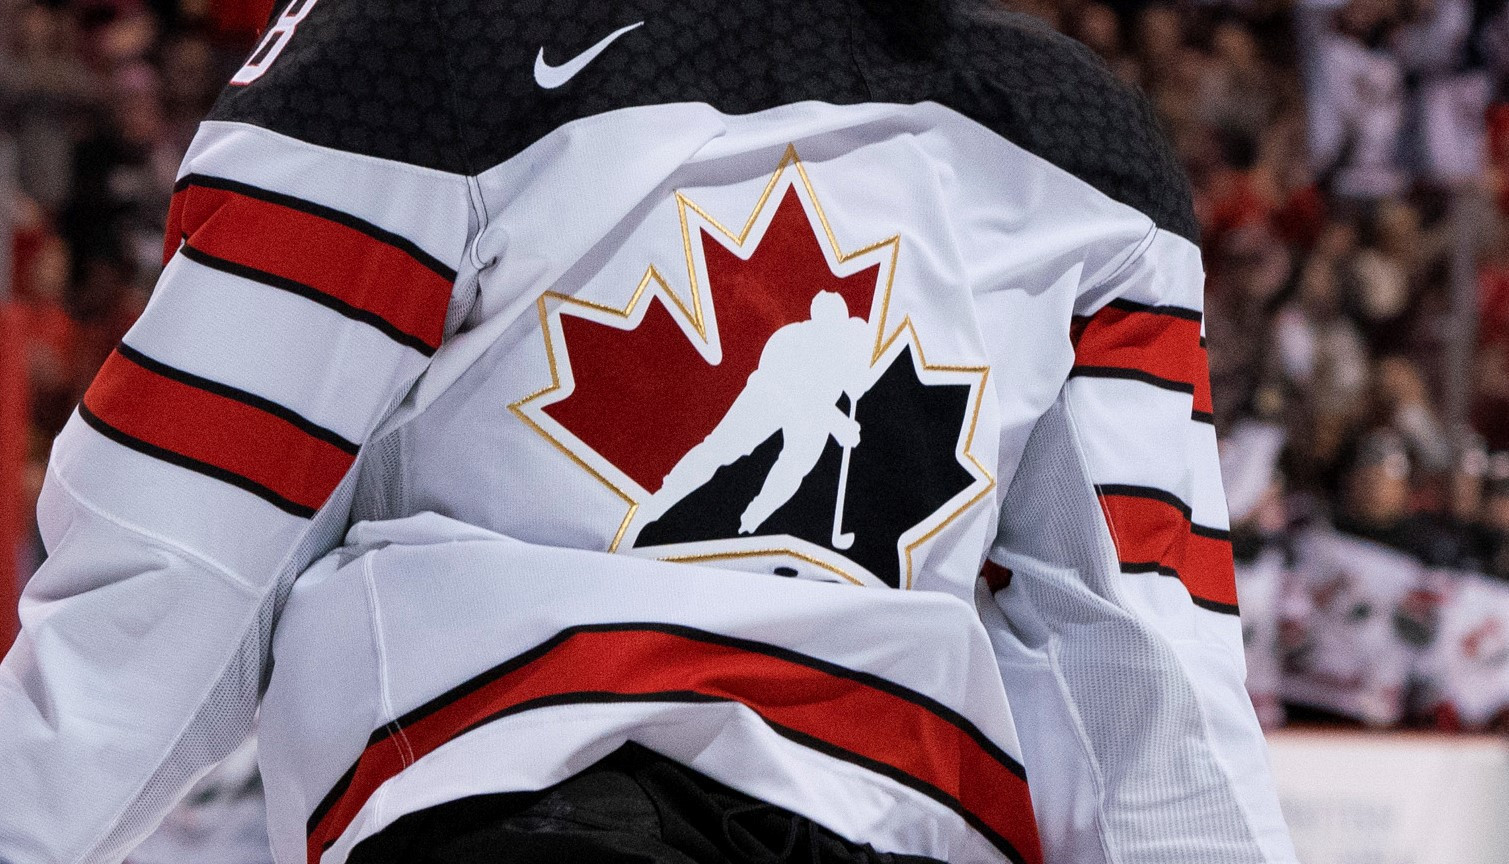 Under-fire Hockey Canada is now being investigated by the International Ice Hockey Federation ©Getty Images